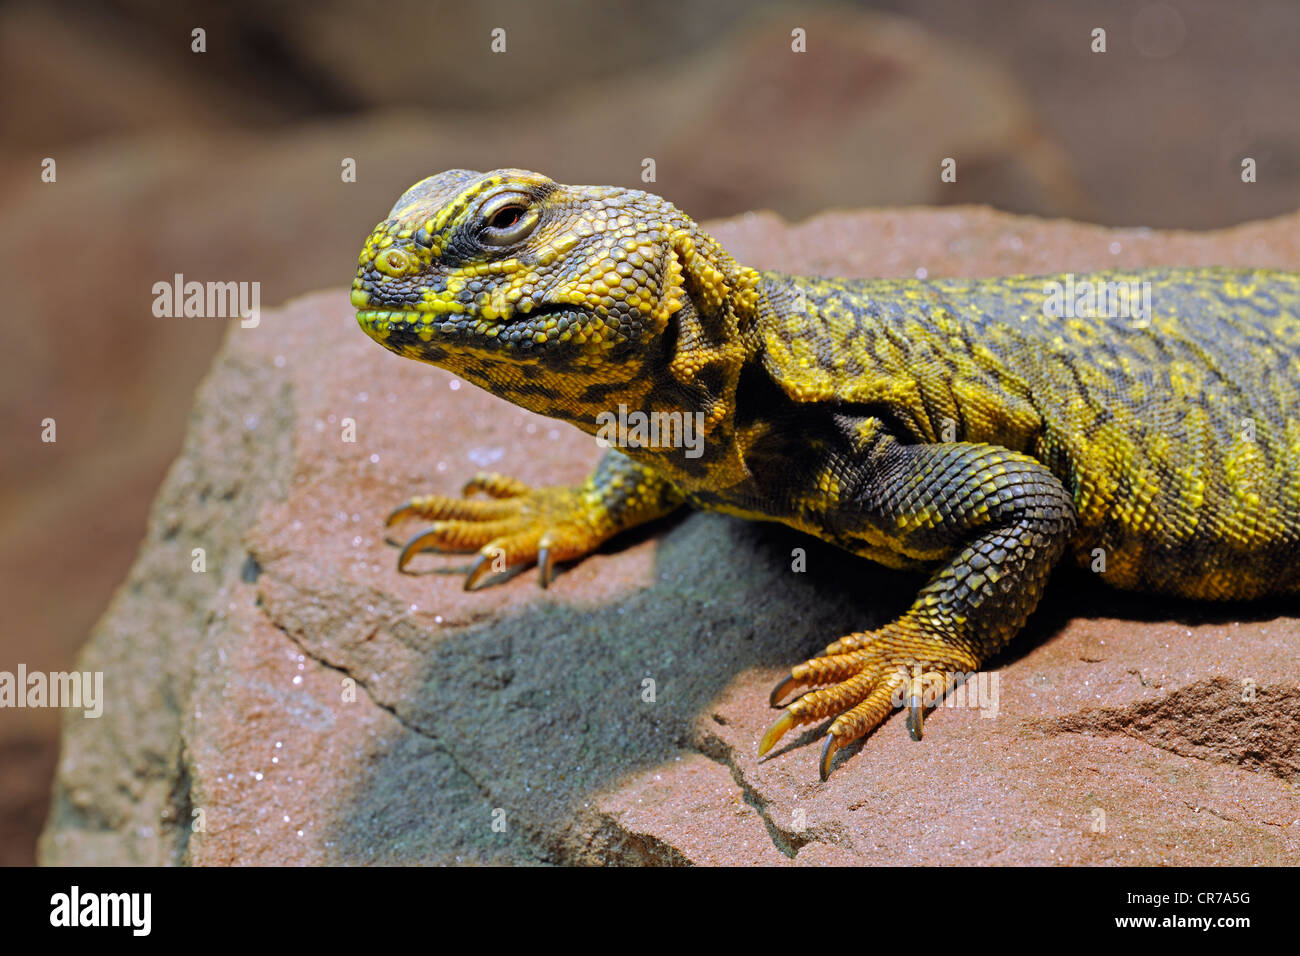 North African or Central Saharan Spiny-tailed Lizard (Uromastyx acanthurus), North Africa Stock Photo